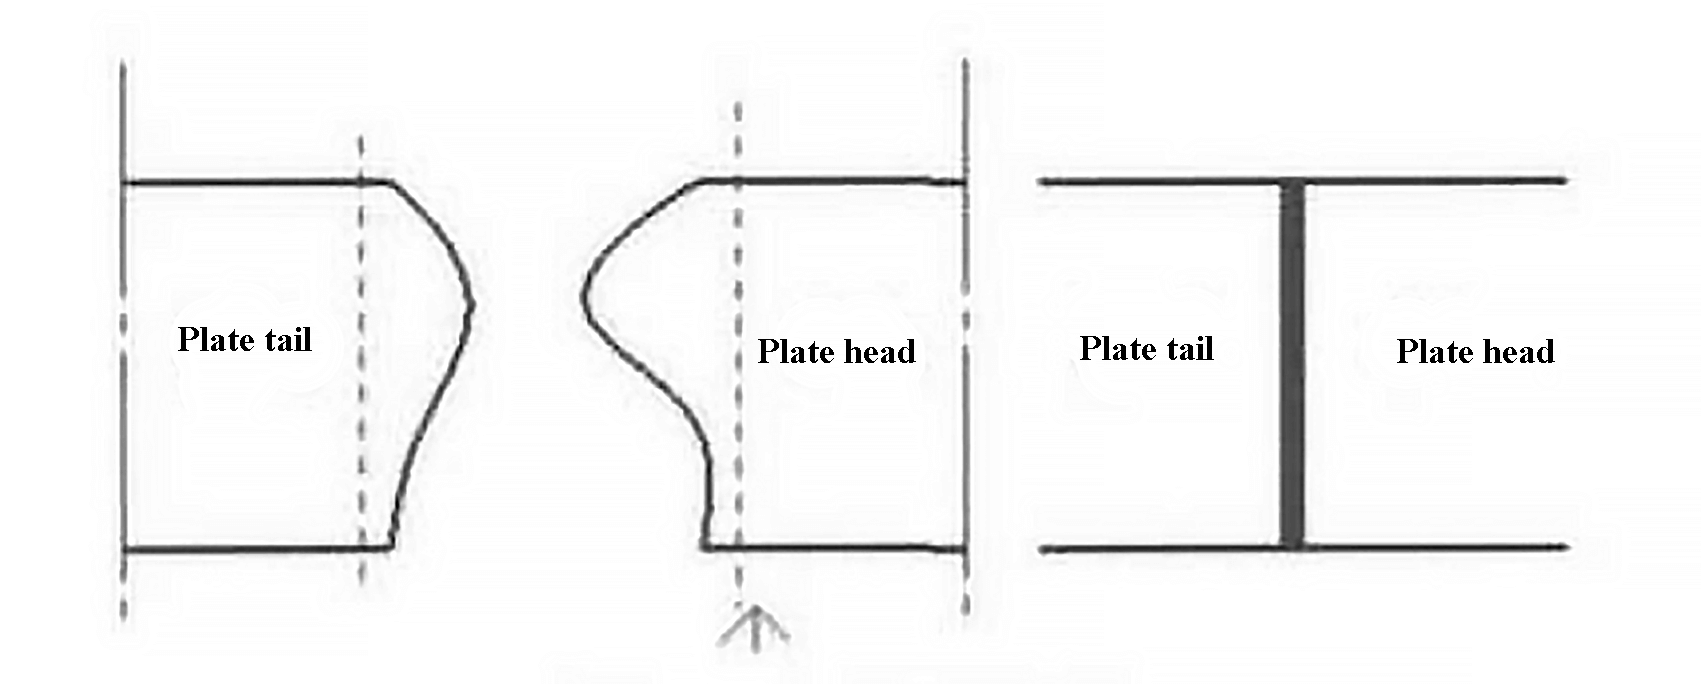 Fig.1 Schematic diagram of the head